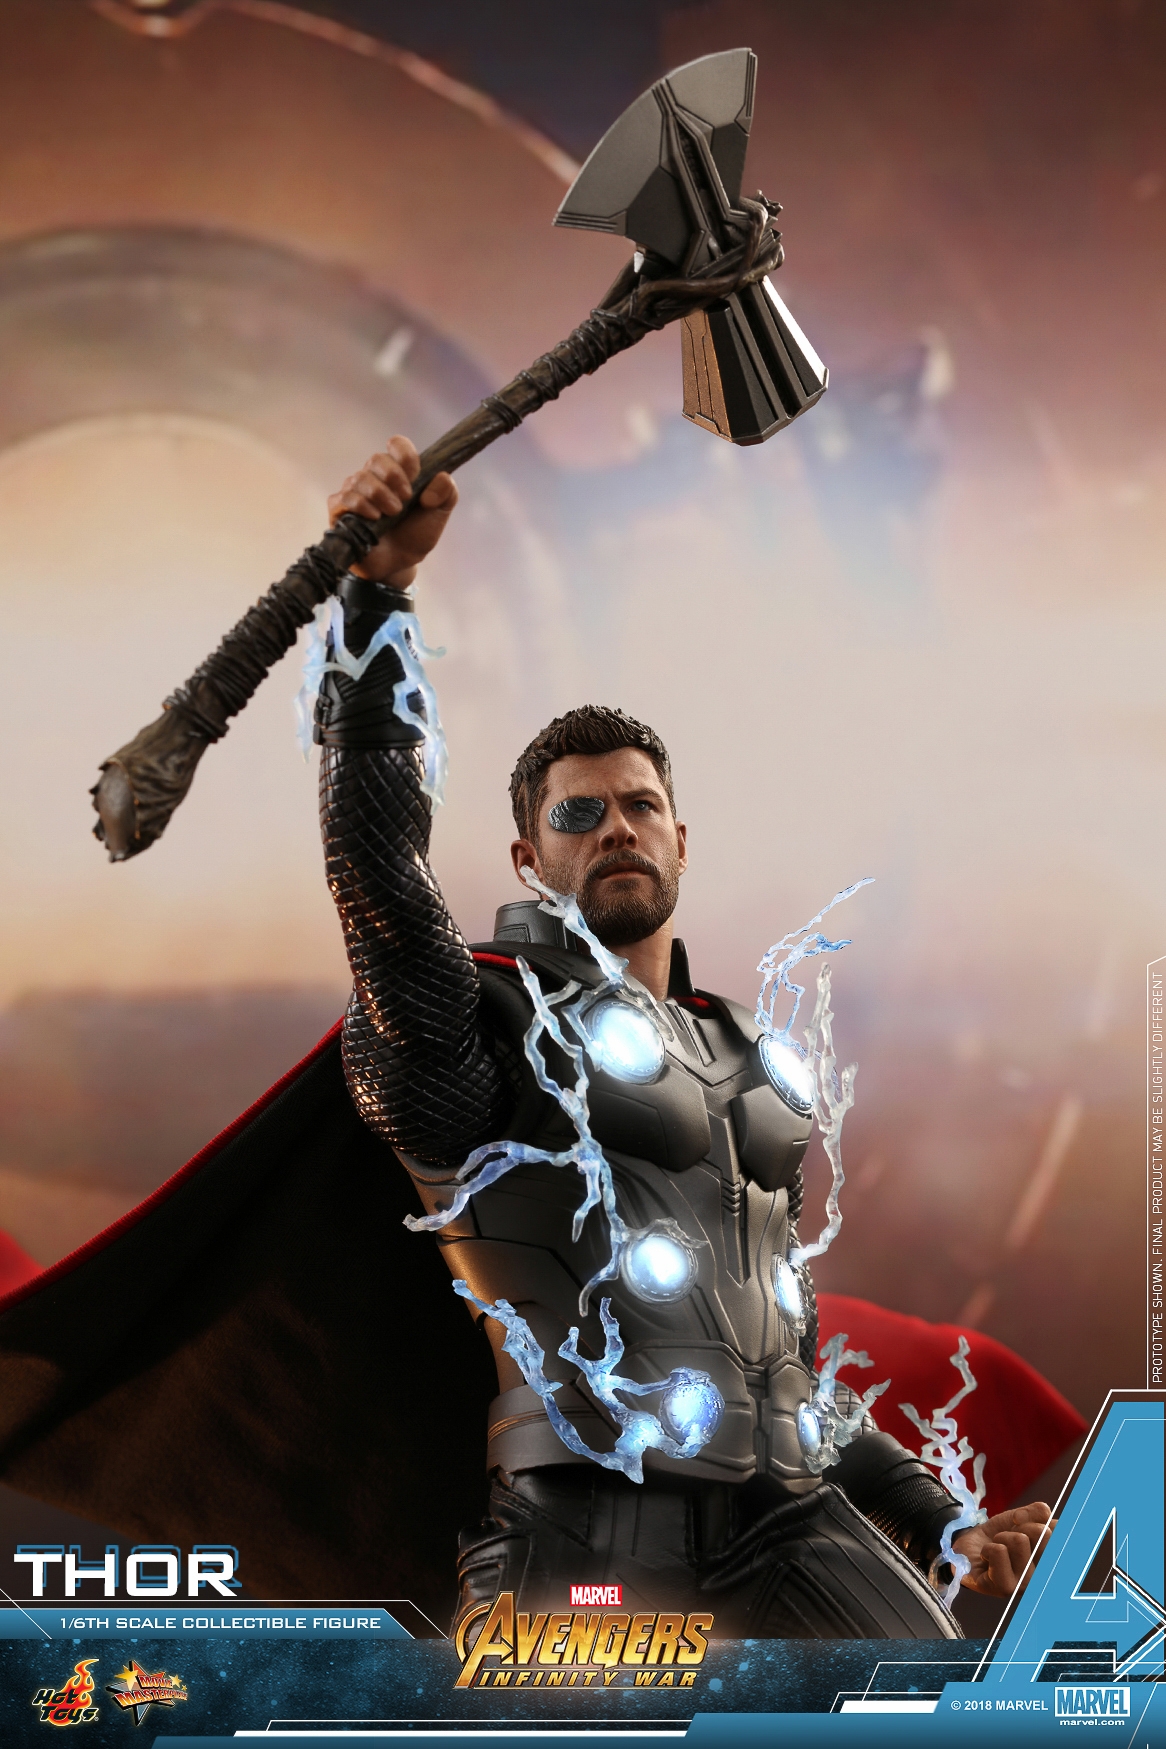 Hot-Toys-MMS474-Avengers-Infinity-War-Thor-Collectible-Figure-020.jpg